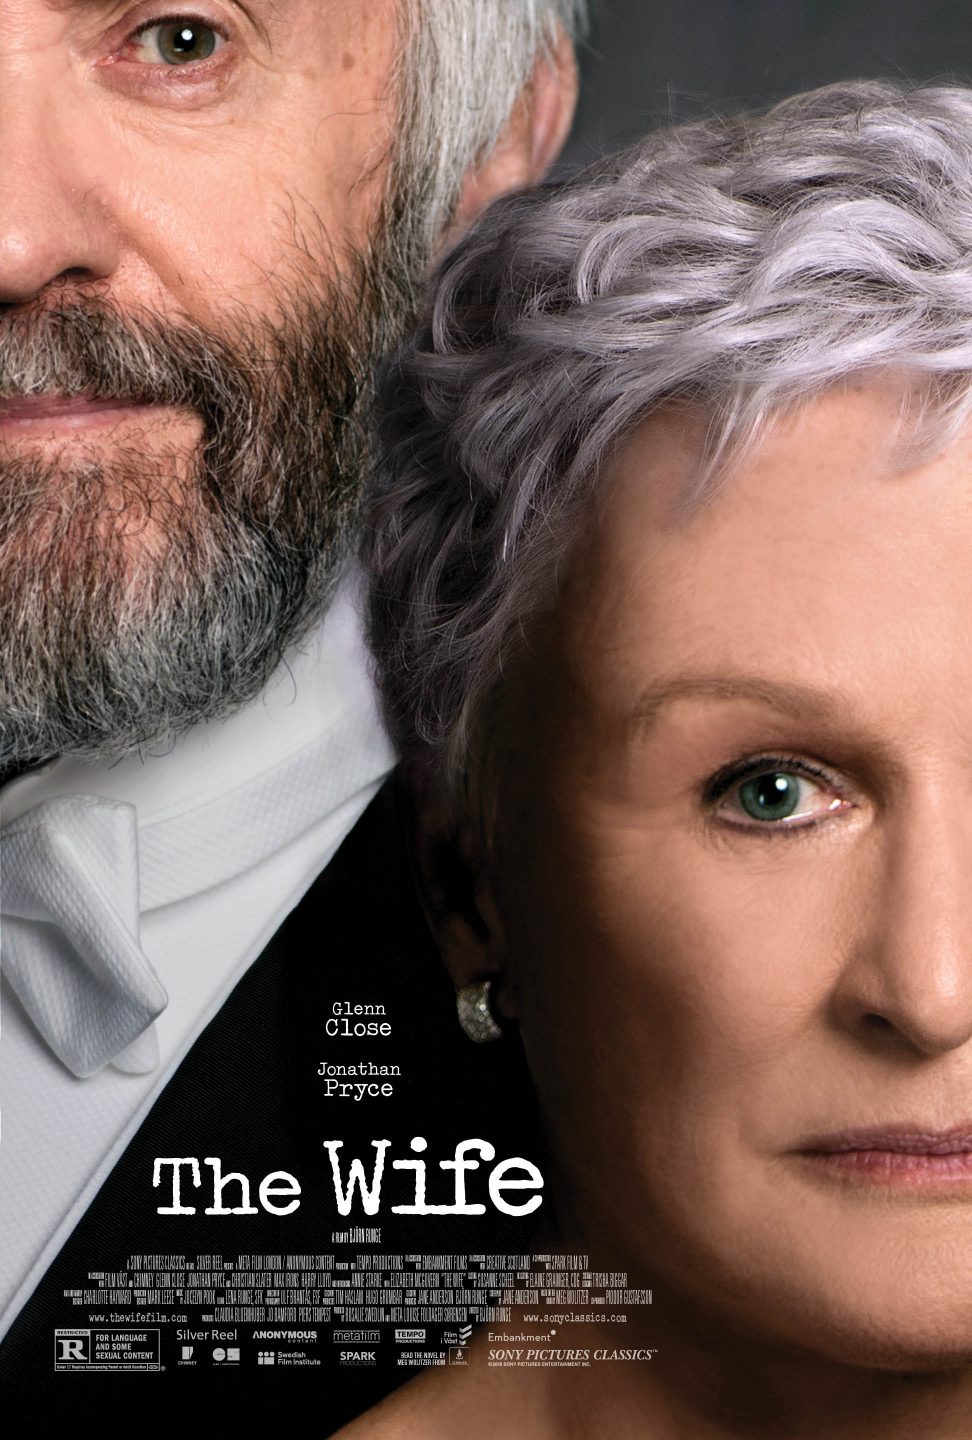 The Wife poster (Sony Pictures Classics)